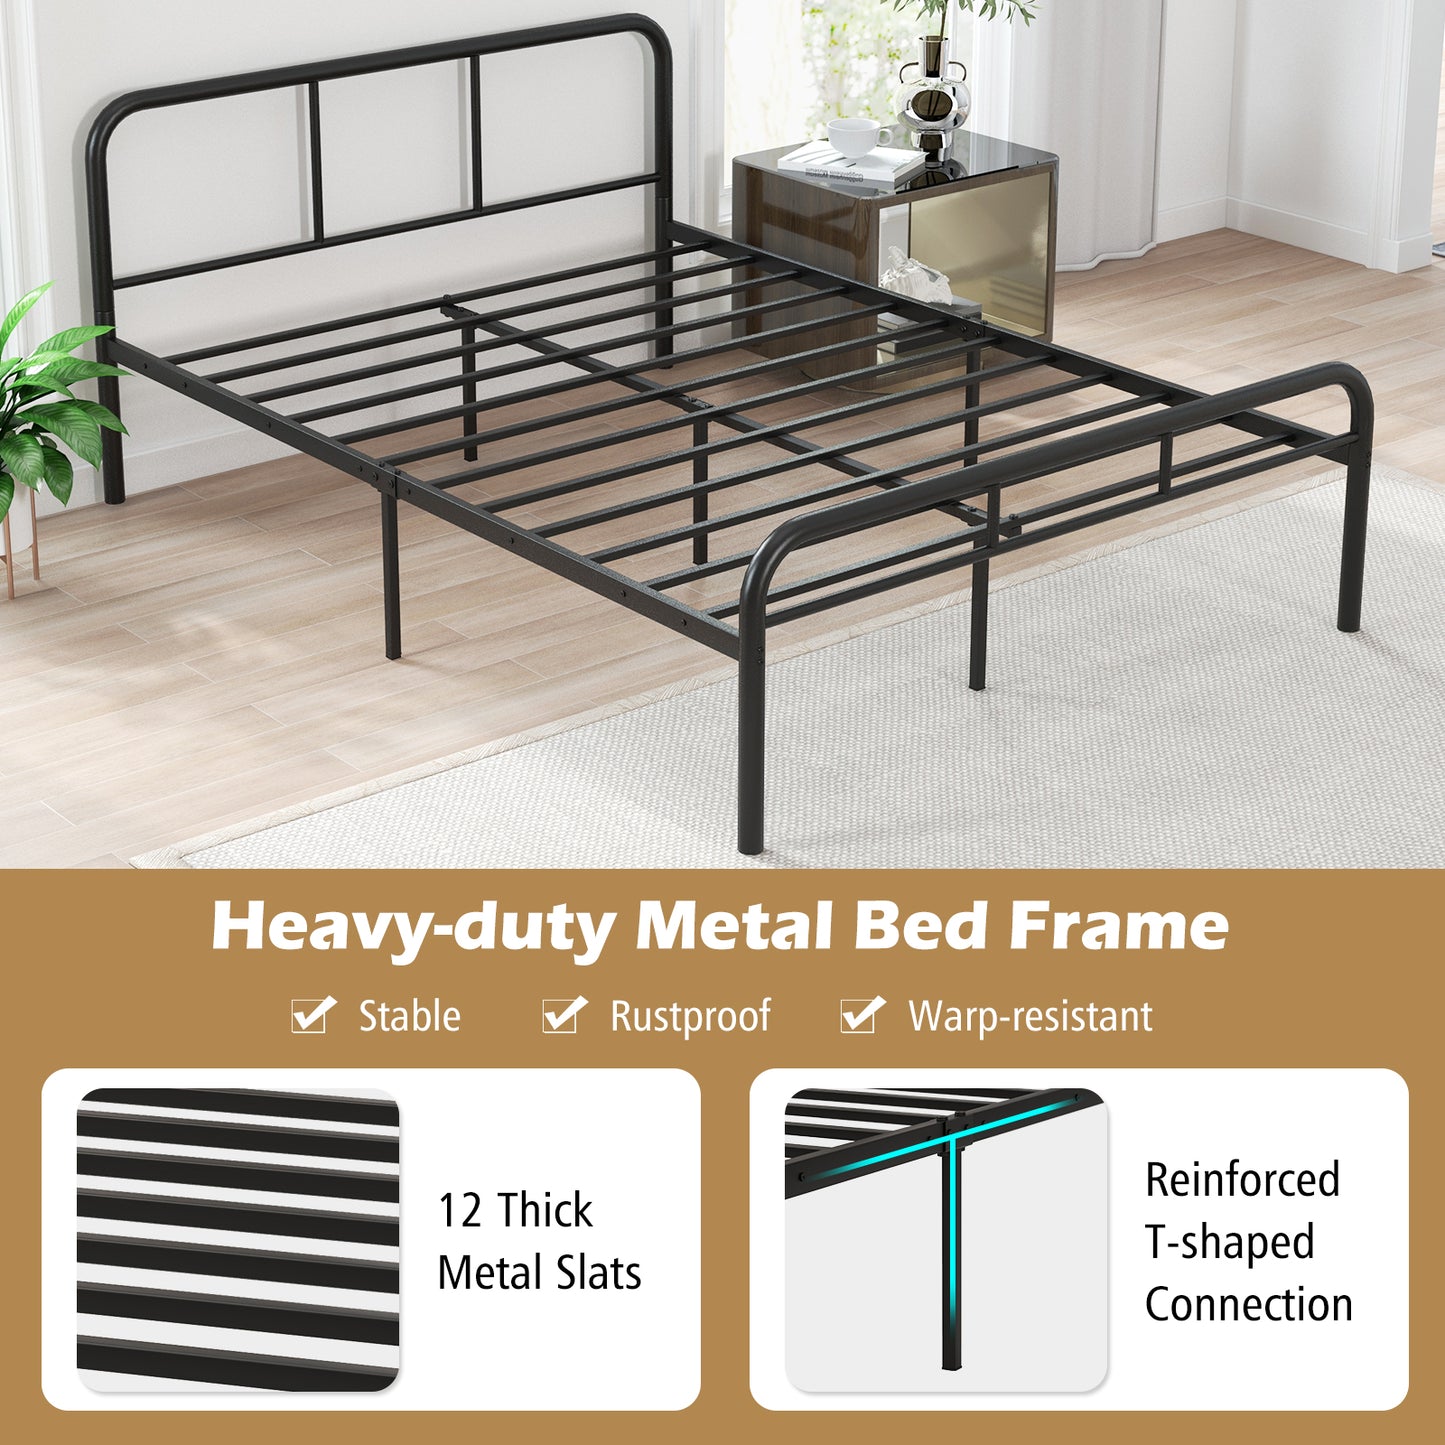 Full Bed Frame with Headboard and Footboard No Box Spring Needed-Black